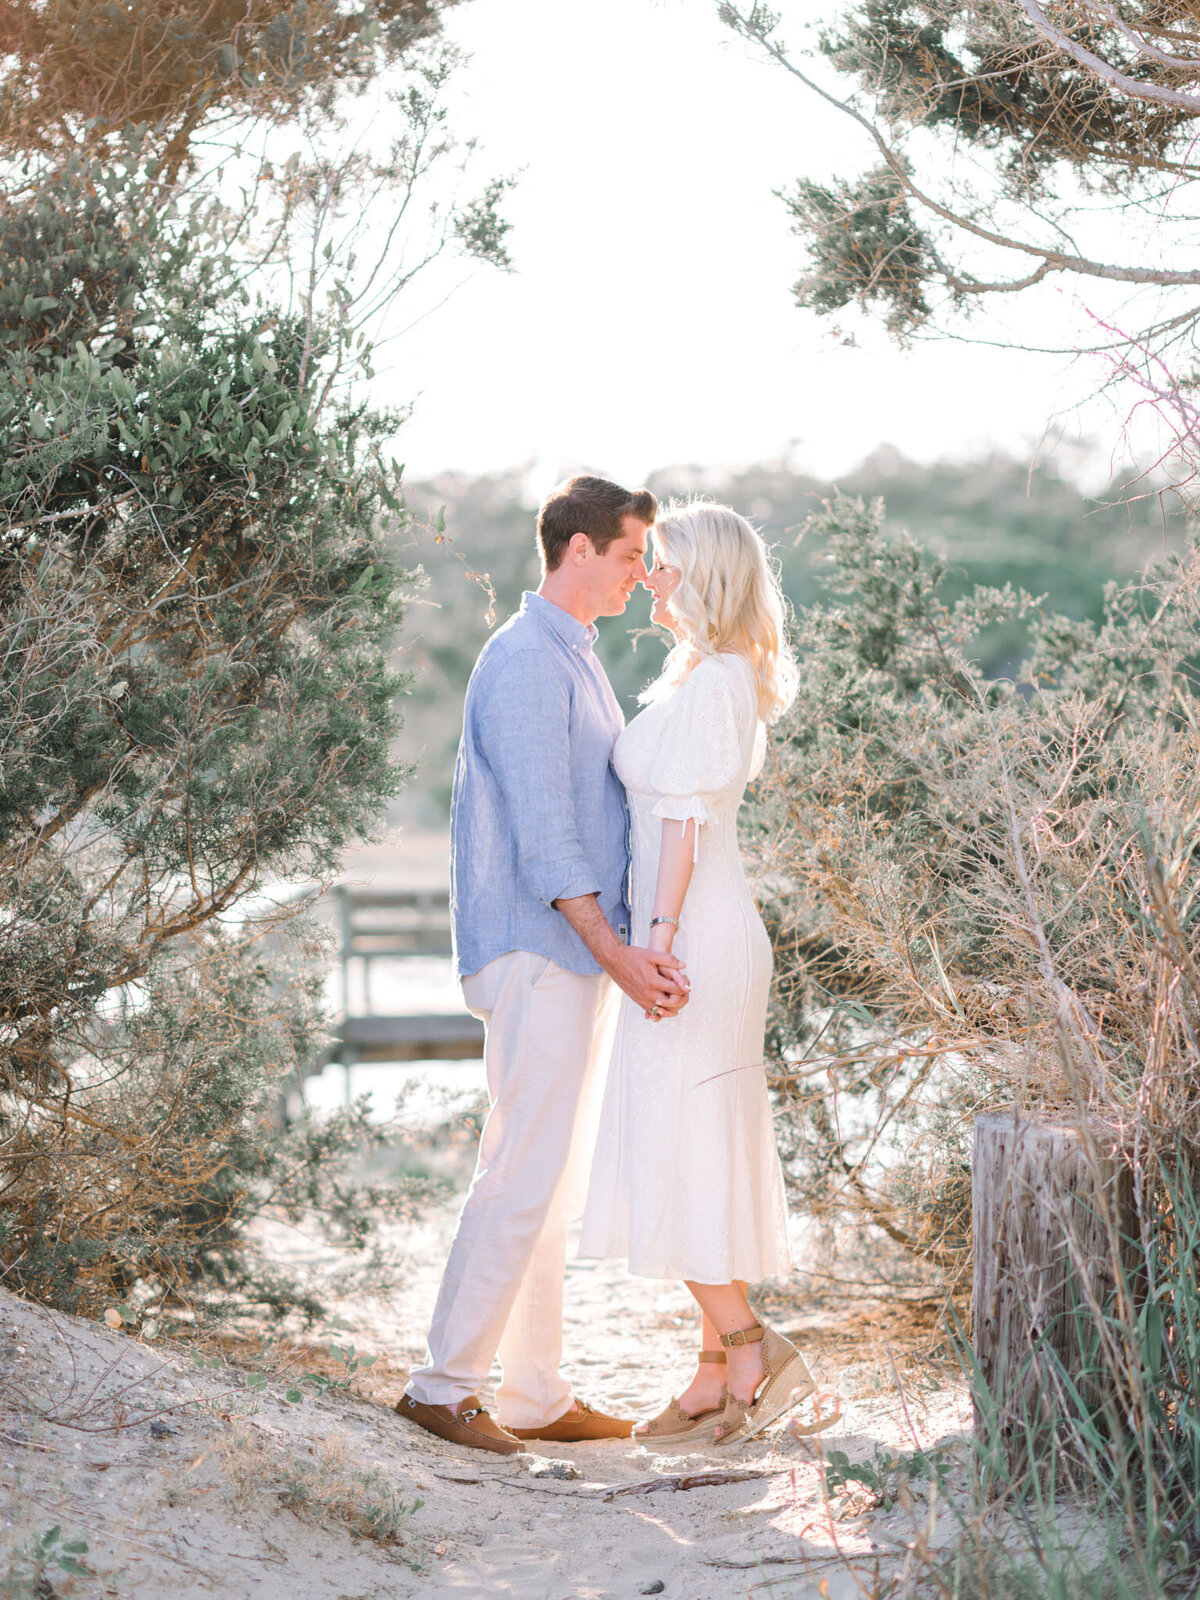 Engagement Pictures in Myrtle Beach, South Carolina - Engagement and Portrait Photography